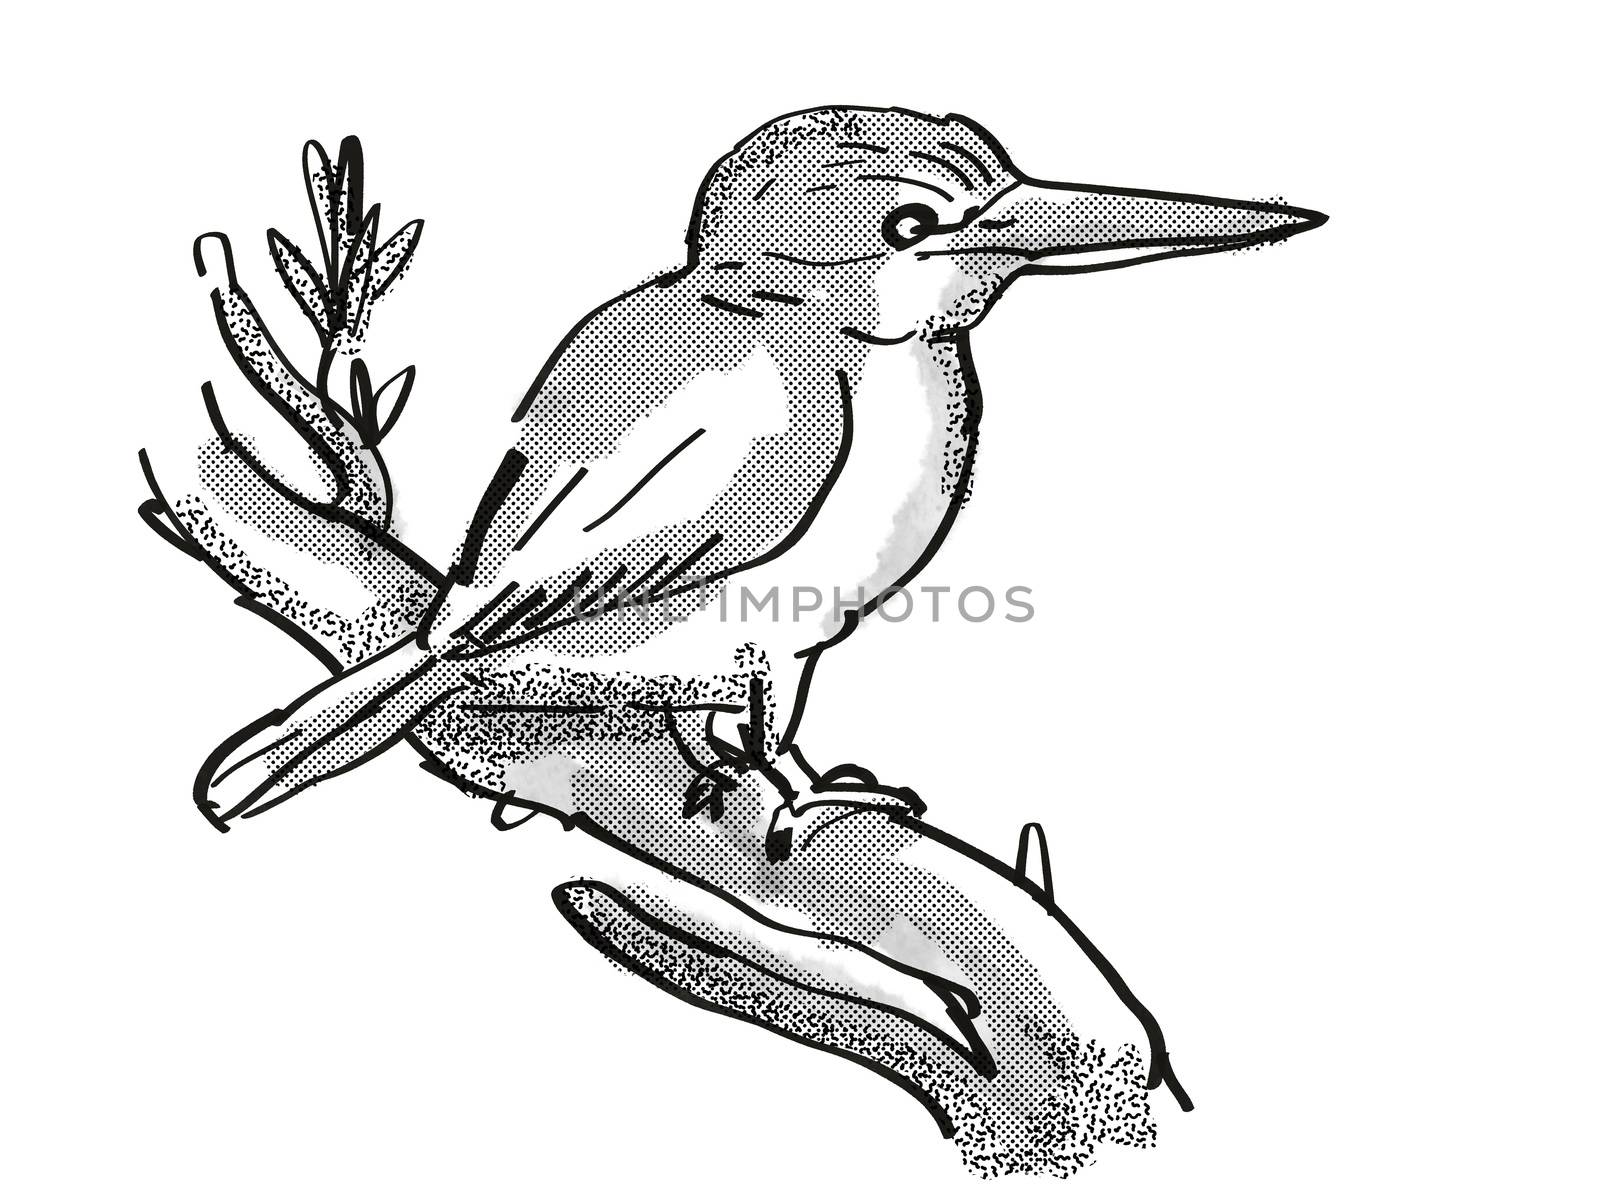 Retro cartoon style drawing of a kingfisher, a New Zealand bird on isolated white background done in black and white